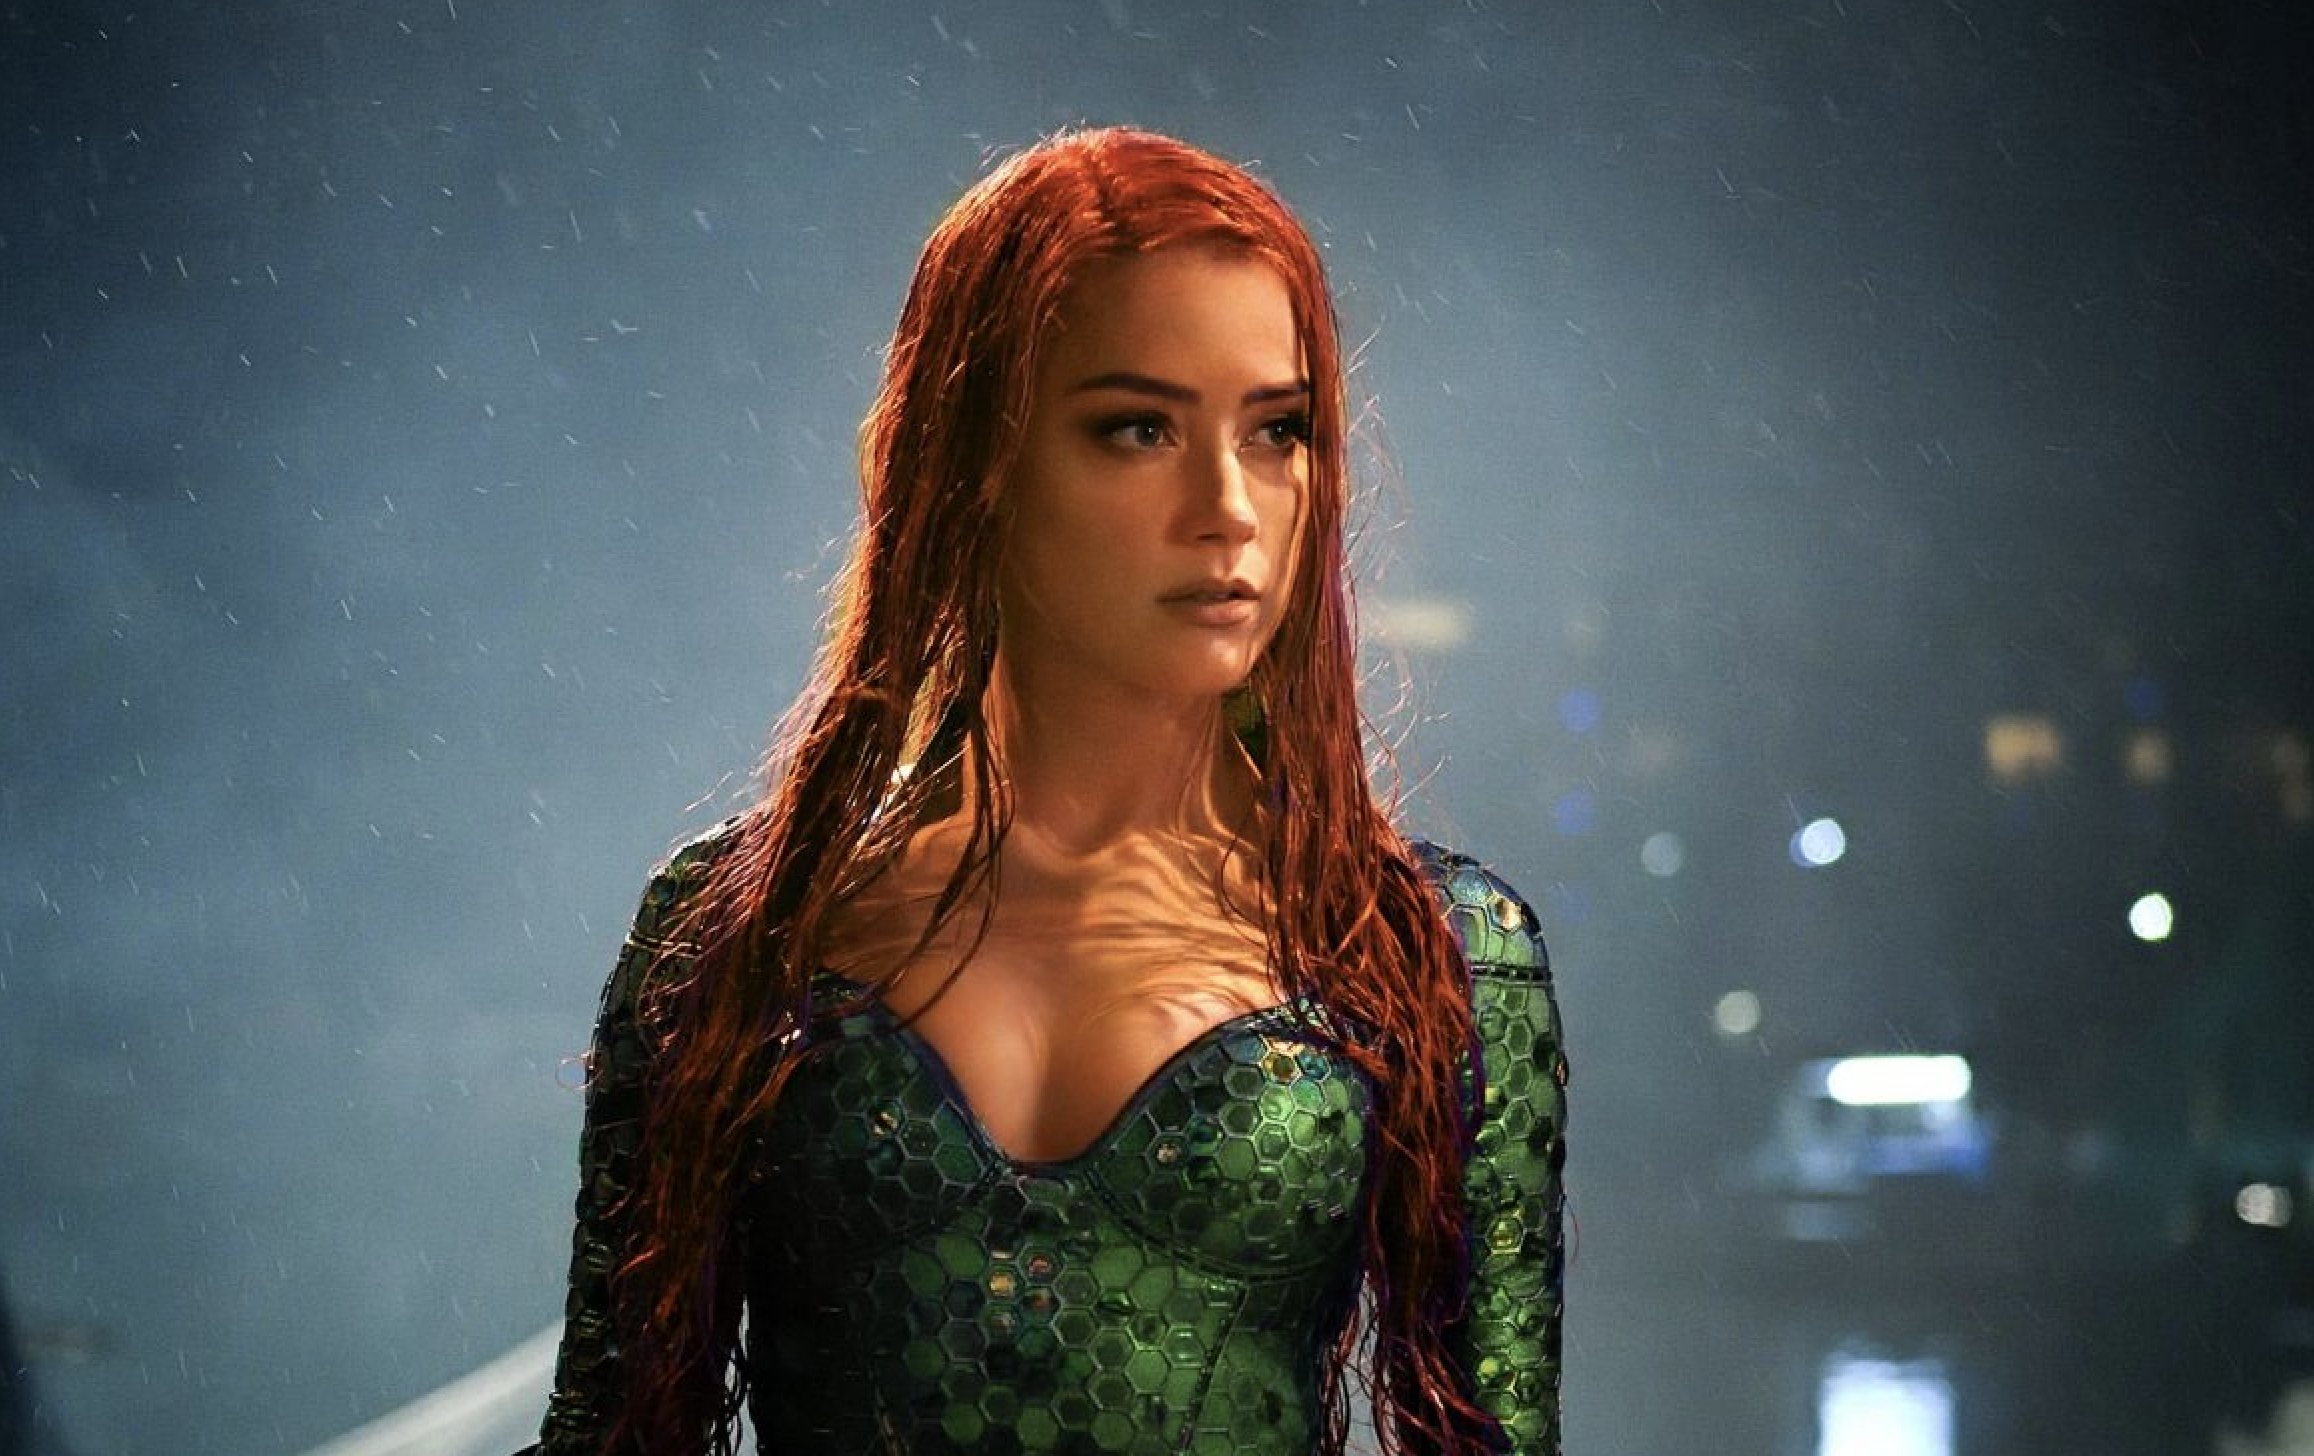 Amber Heard reportedly retains her role as Mera in Aquaman 2